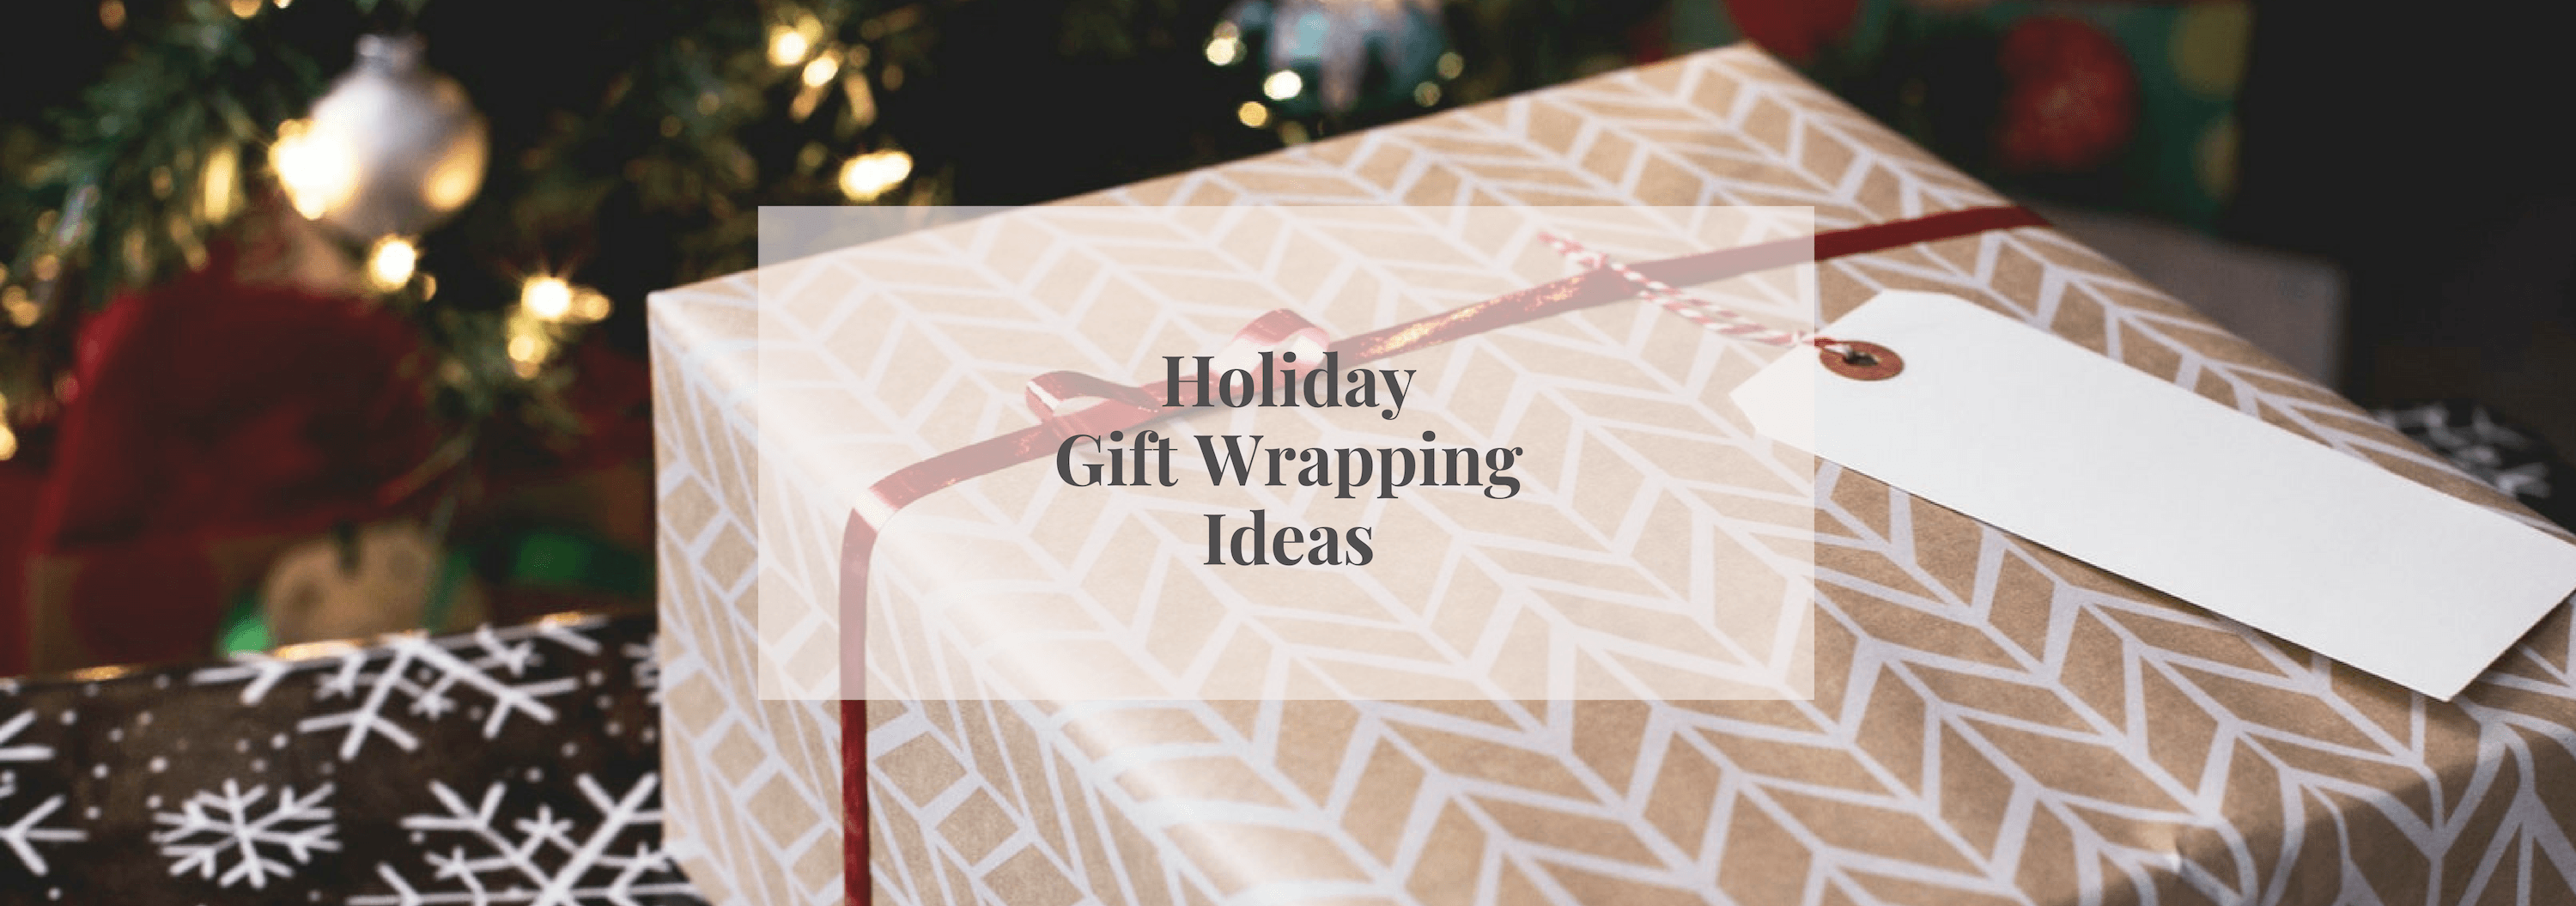 Holiday Gift Wrapping Ideas - Numi